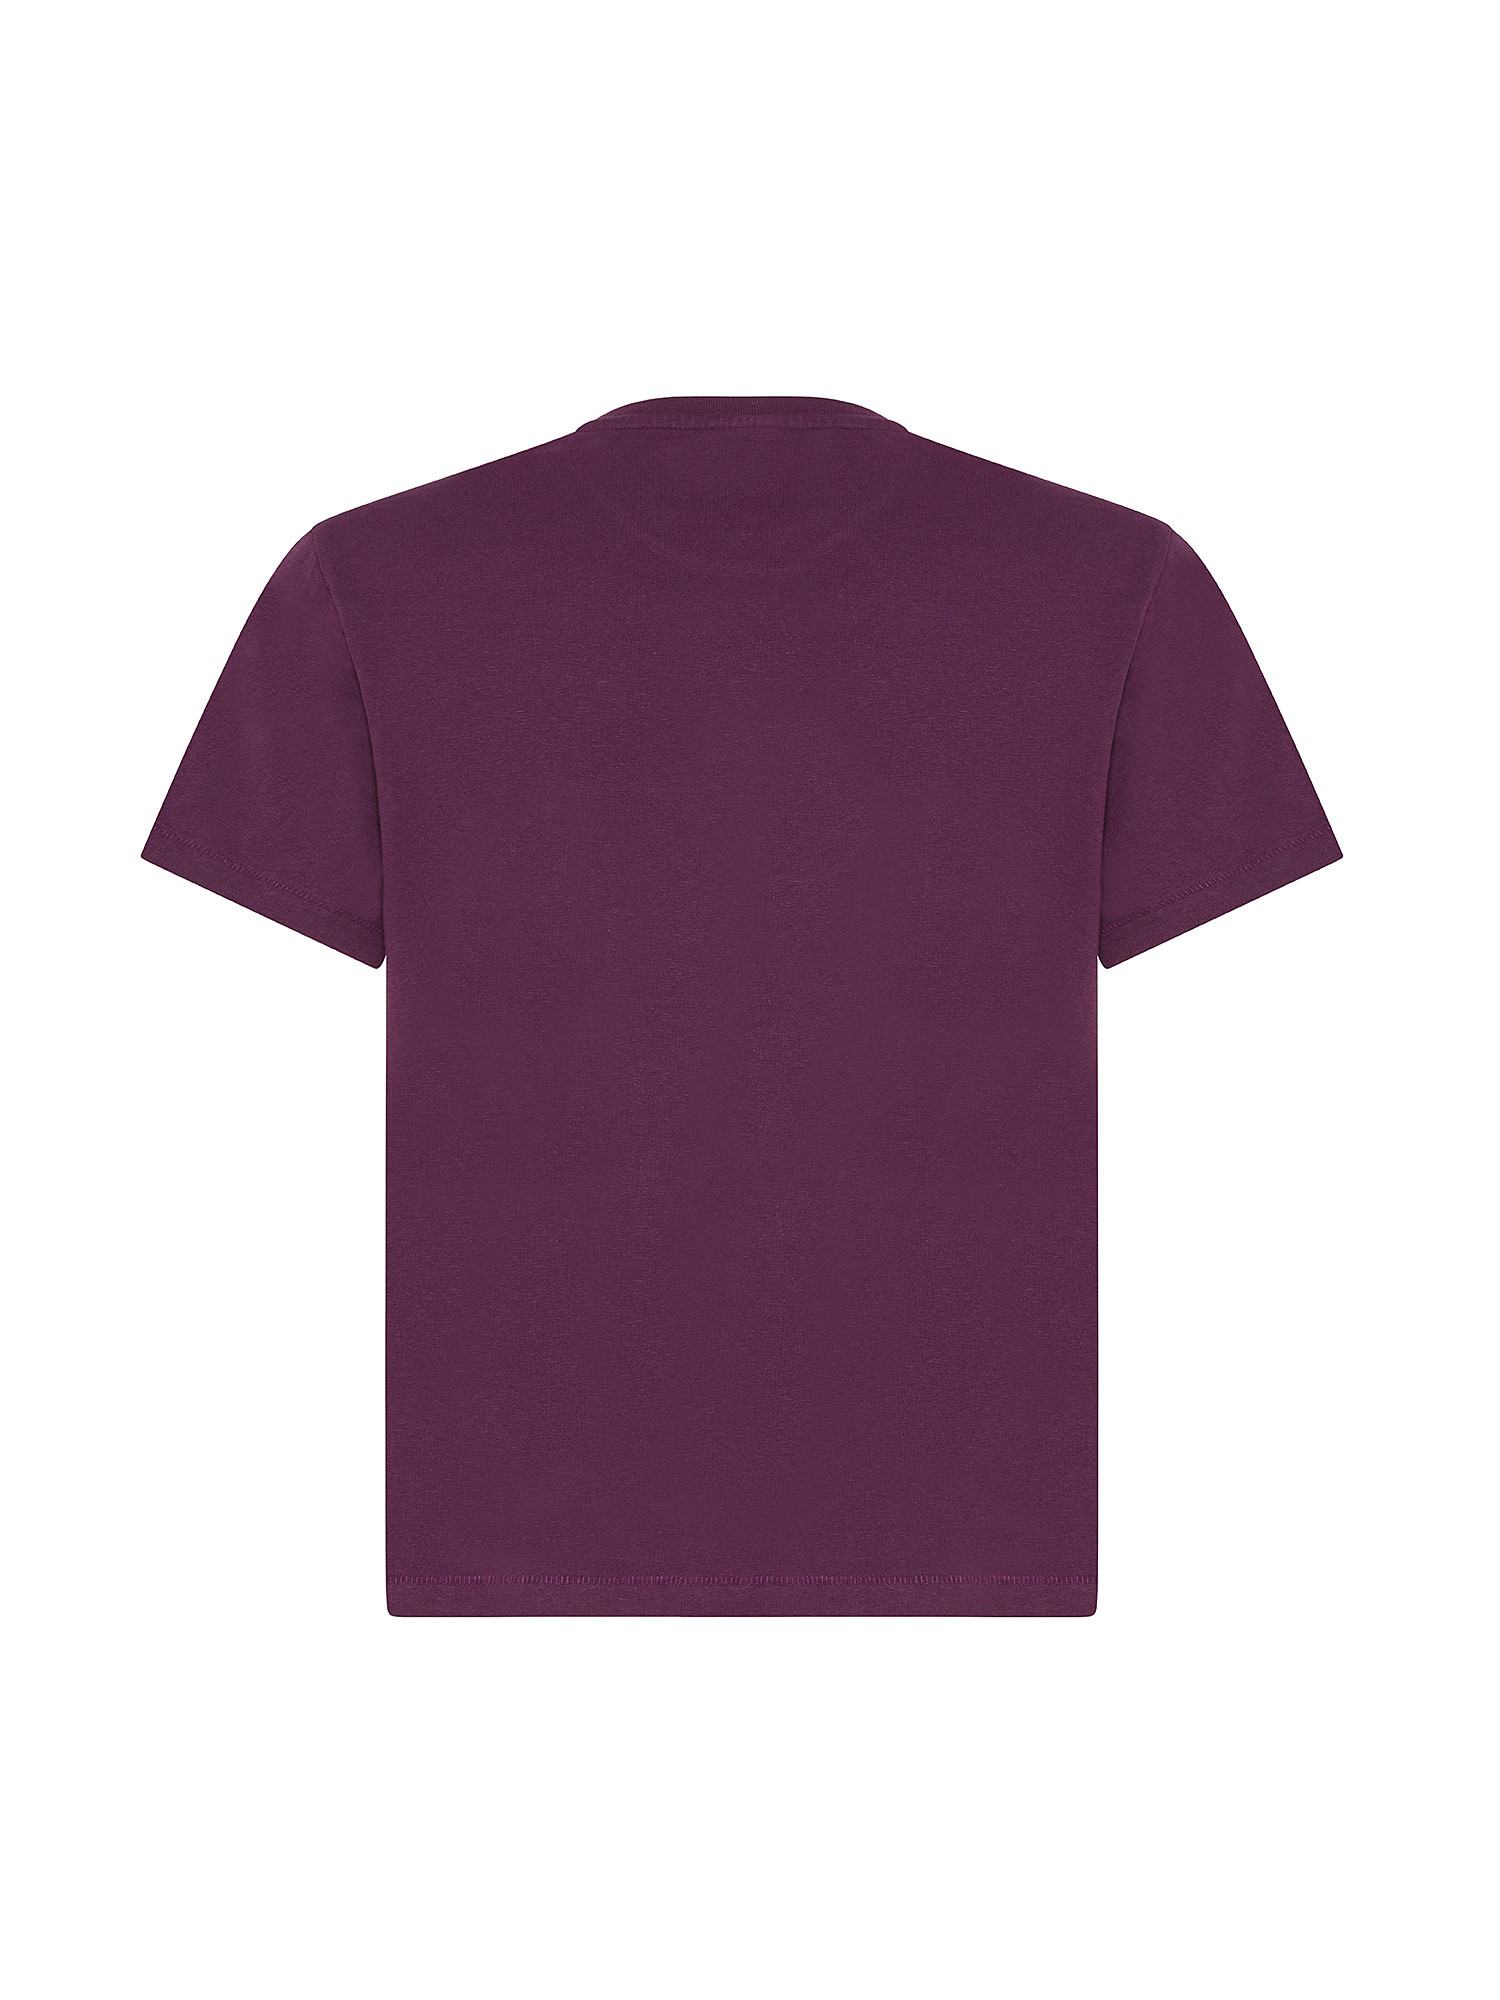 Levi's - T-shirt in cotone, Rosso bordeaux, large image number 1